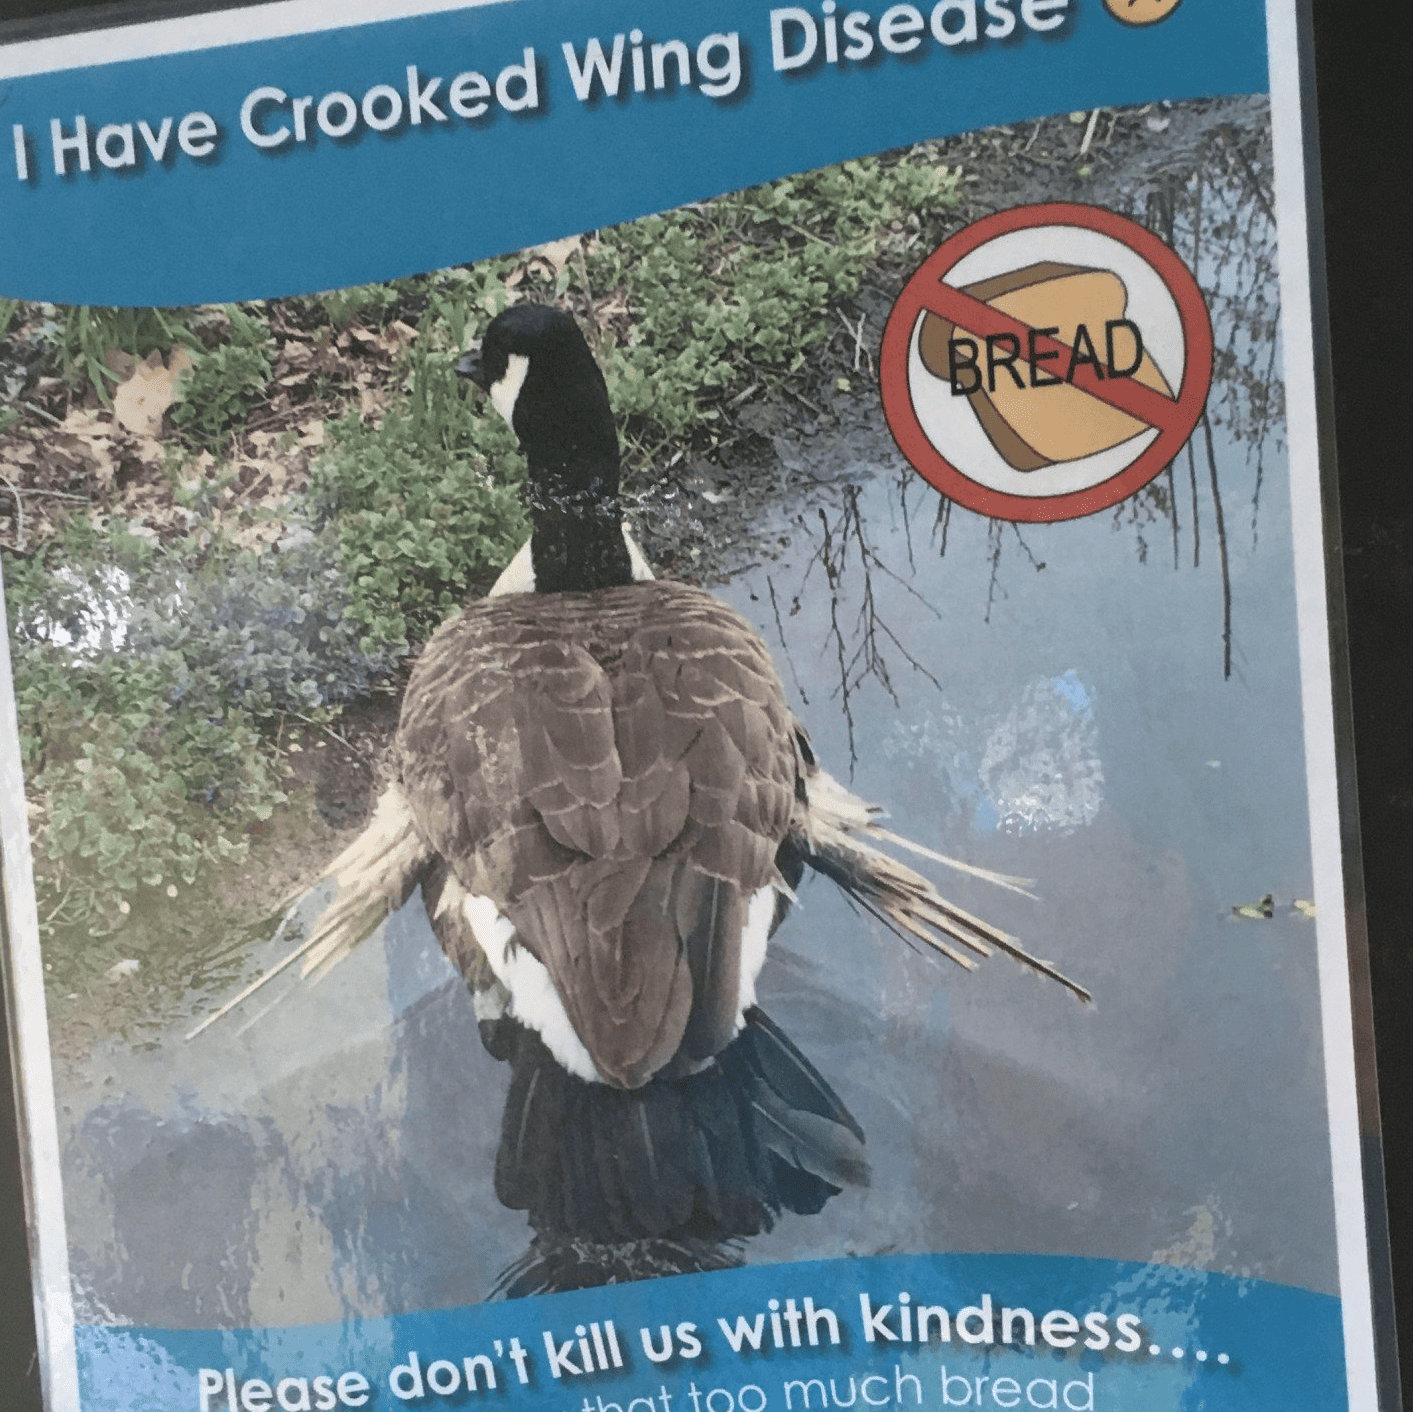 Crooked Wing Disease